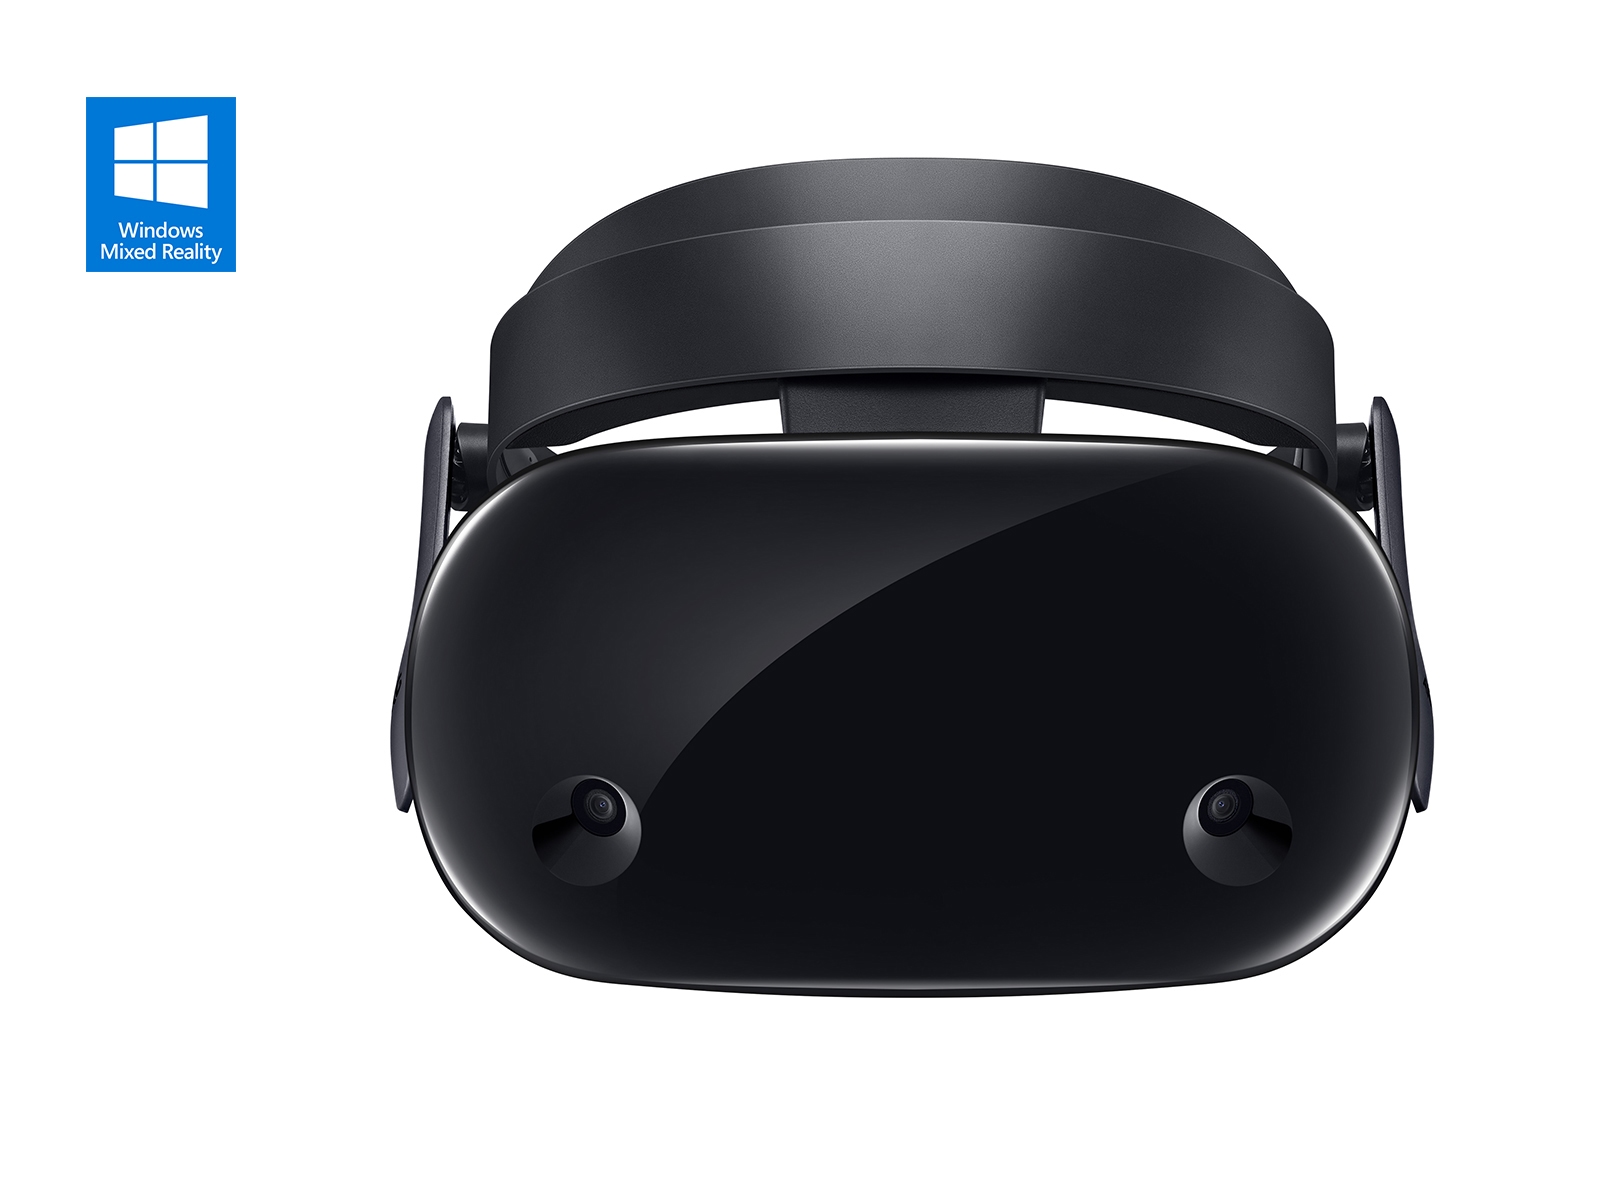 Hmd Odyssey (Mixed Reality), Hmd Support | Samsung Care US